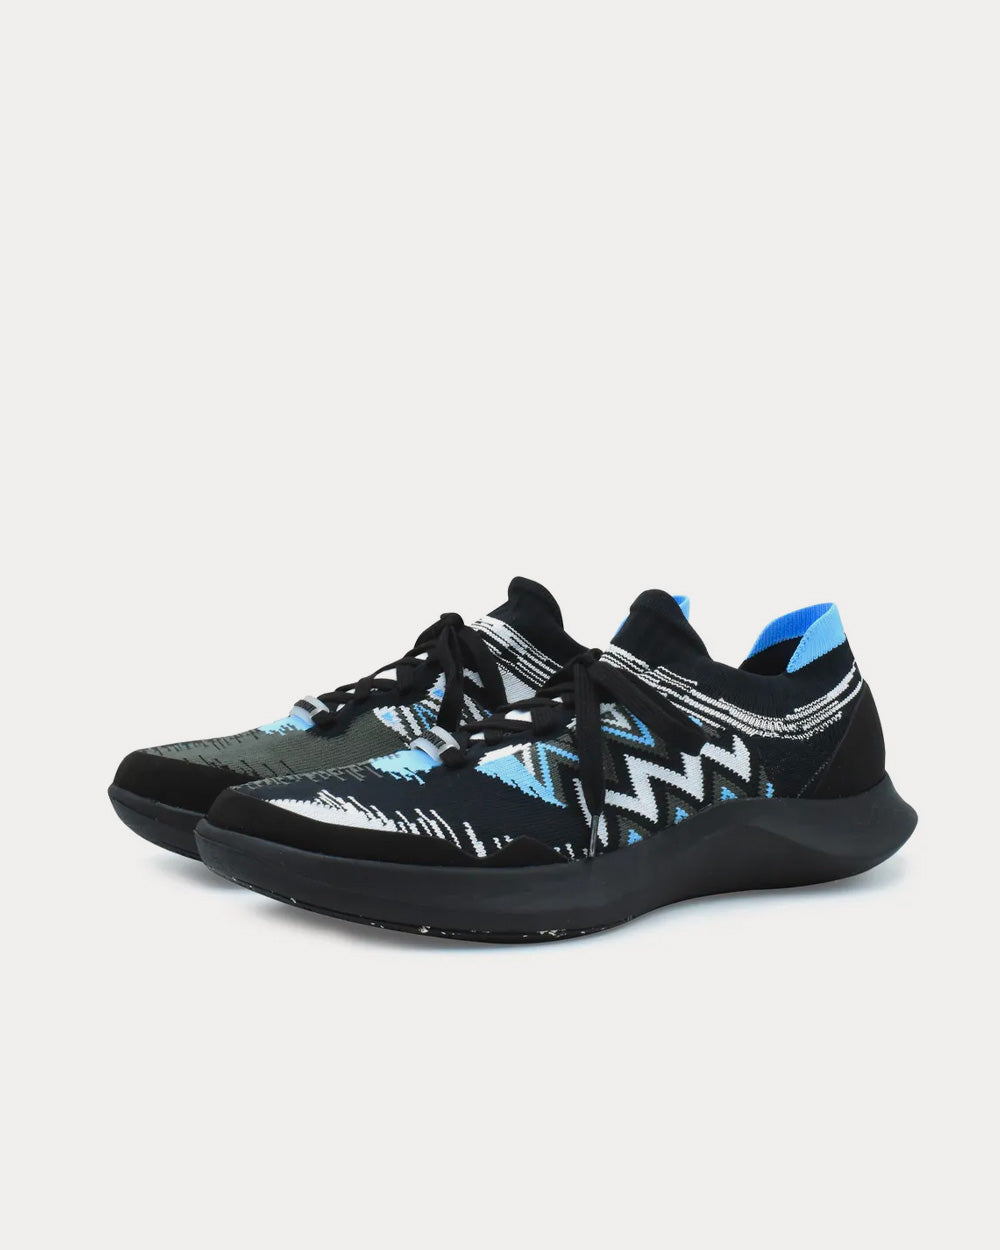 Missoni x ACBC - Fly Blue / Black Low Top Sneakers